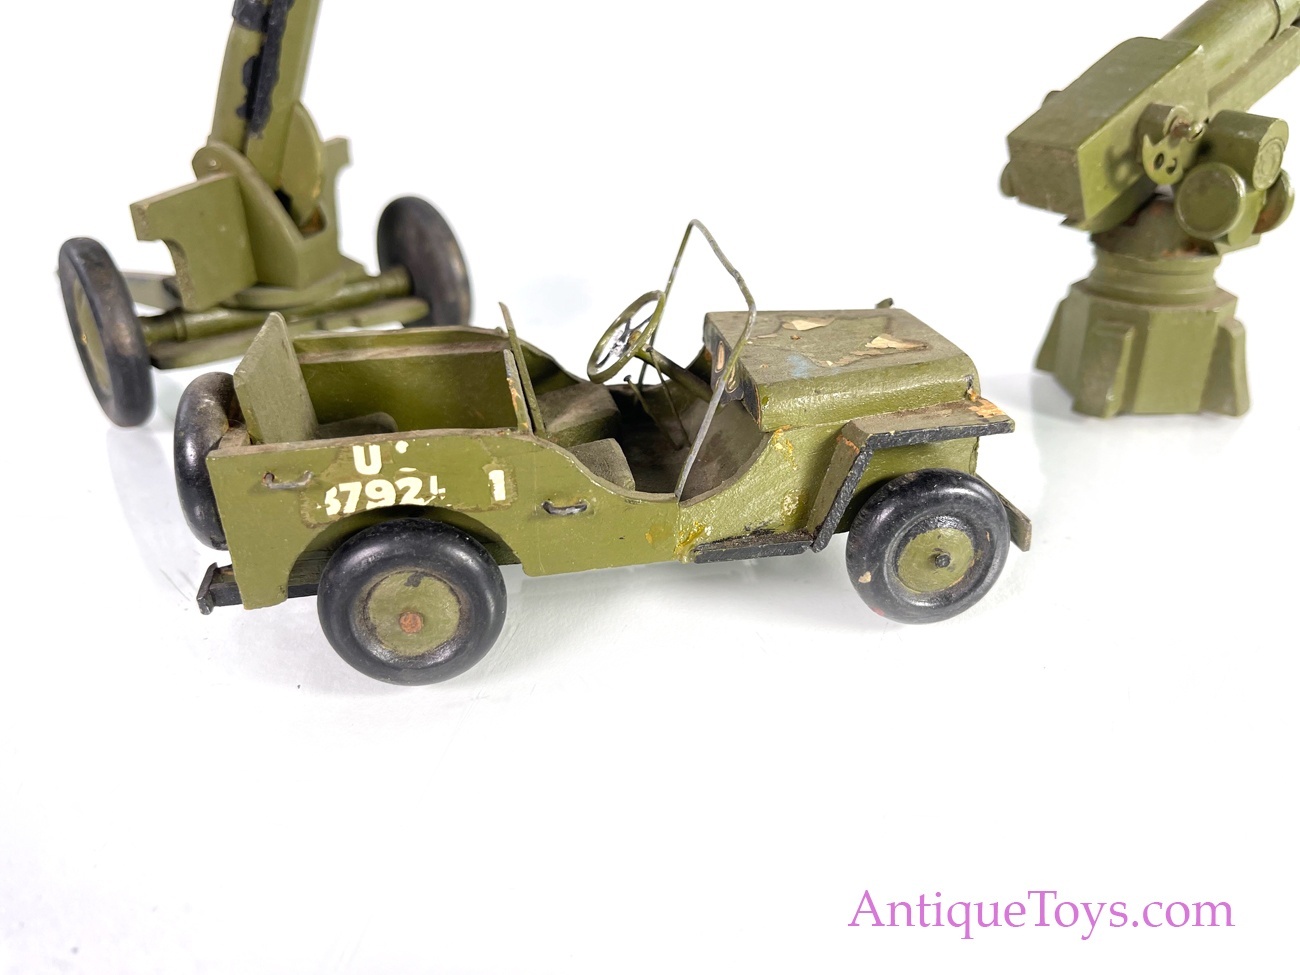 Army Wooden Jeep and Cannon War Models *SOLD* - AntiqueToys.com